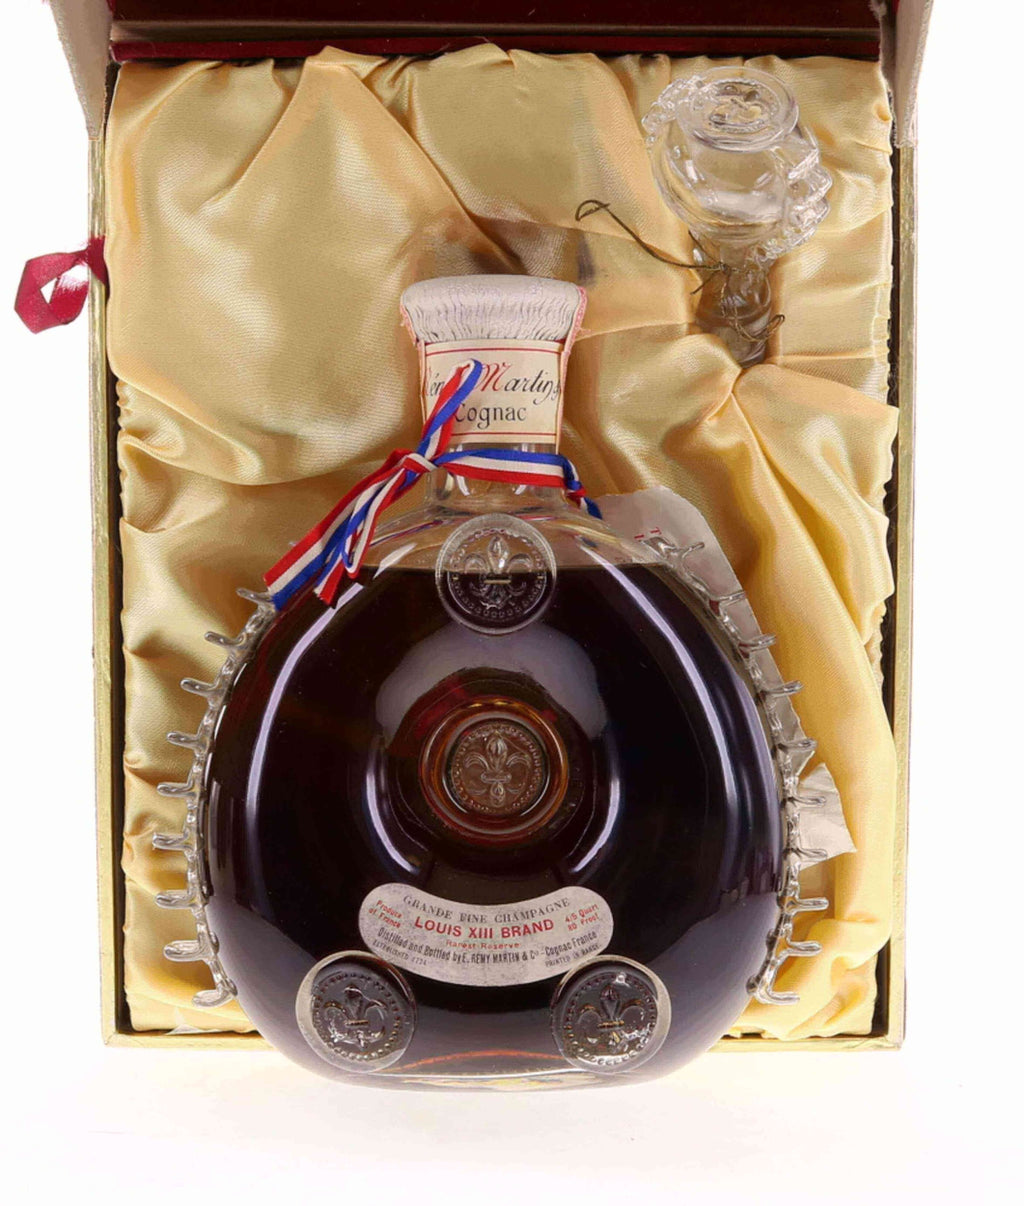 BUY] Remy Martin Louis XIII mid 1960s Cognac at